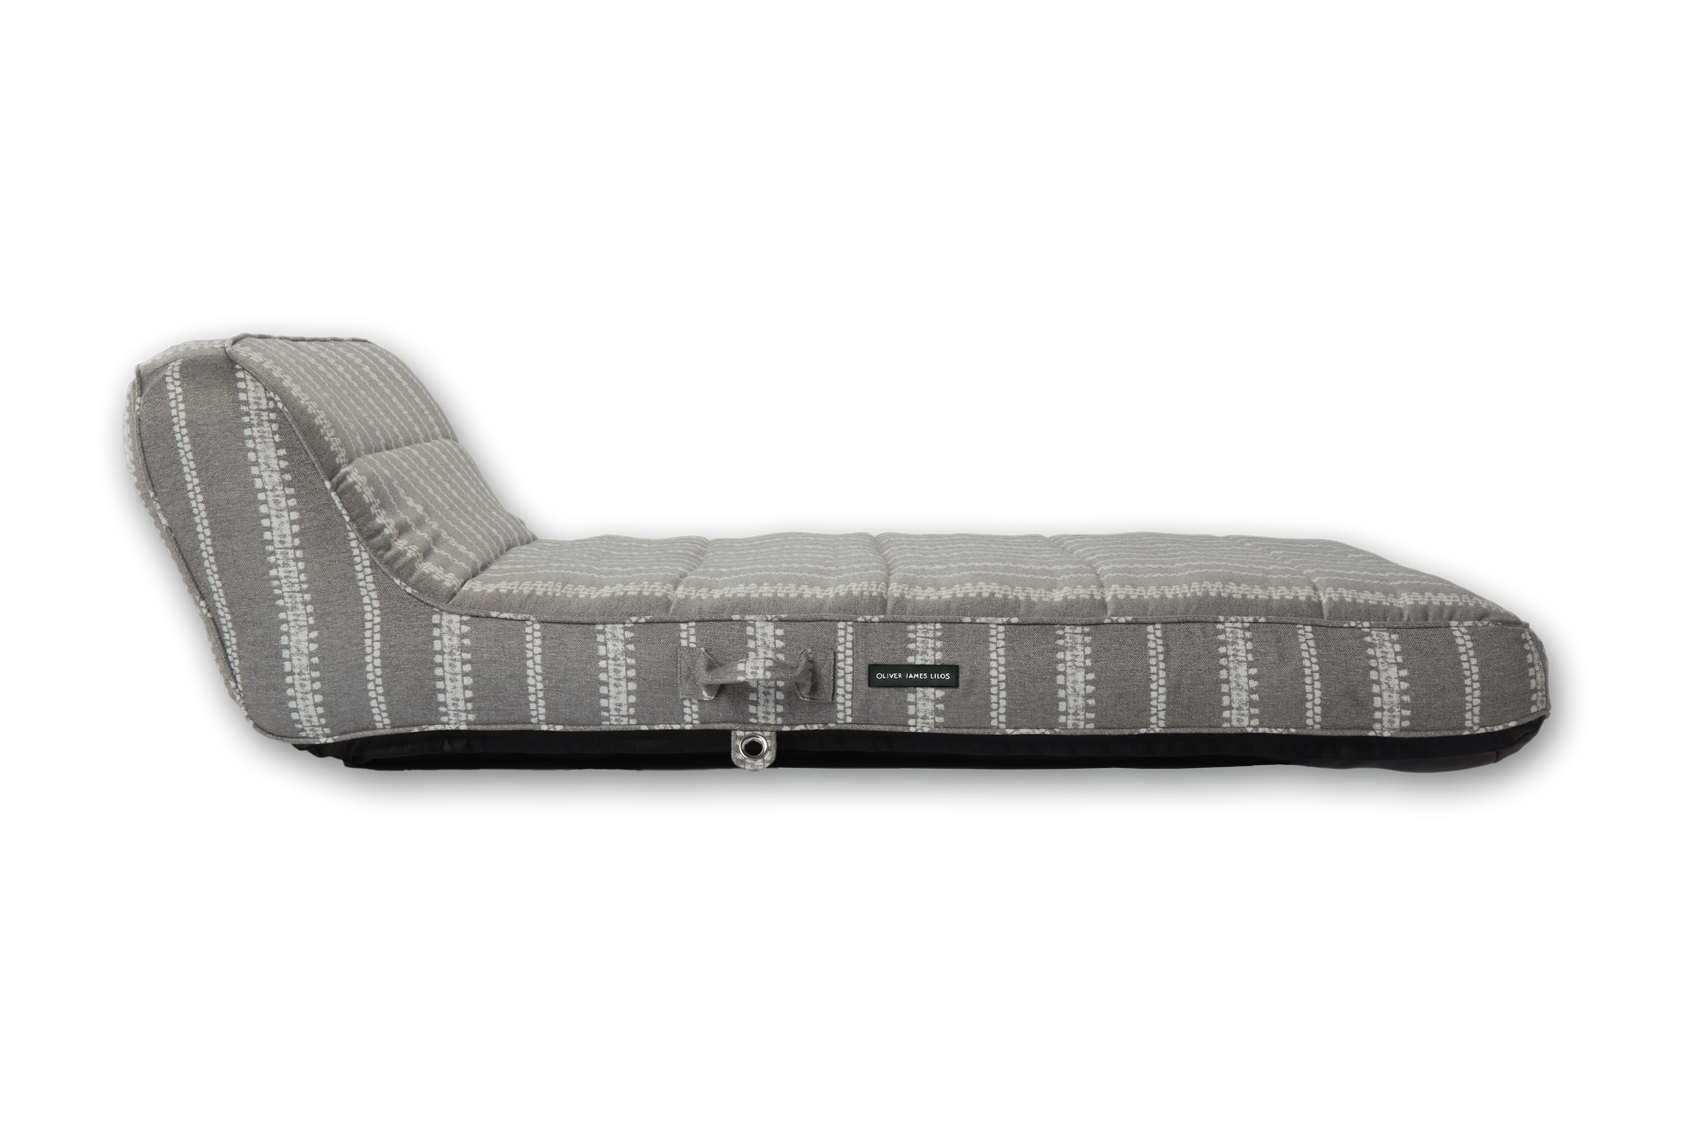 The side of a luxury pool float in grey and white striped fabric.